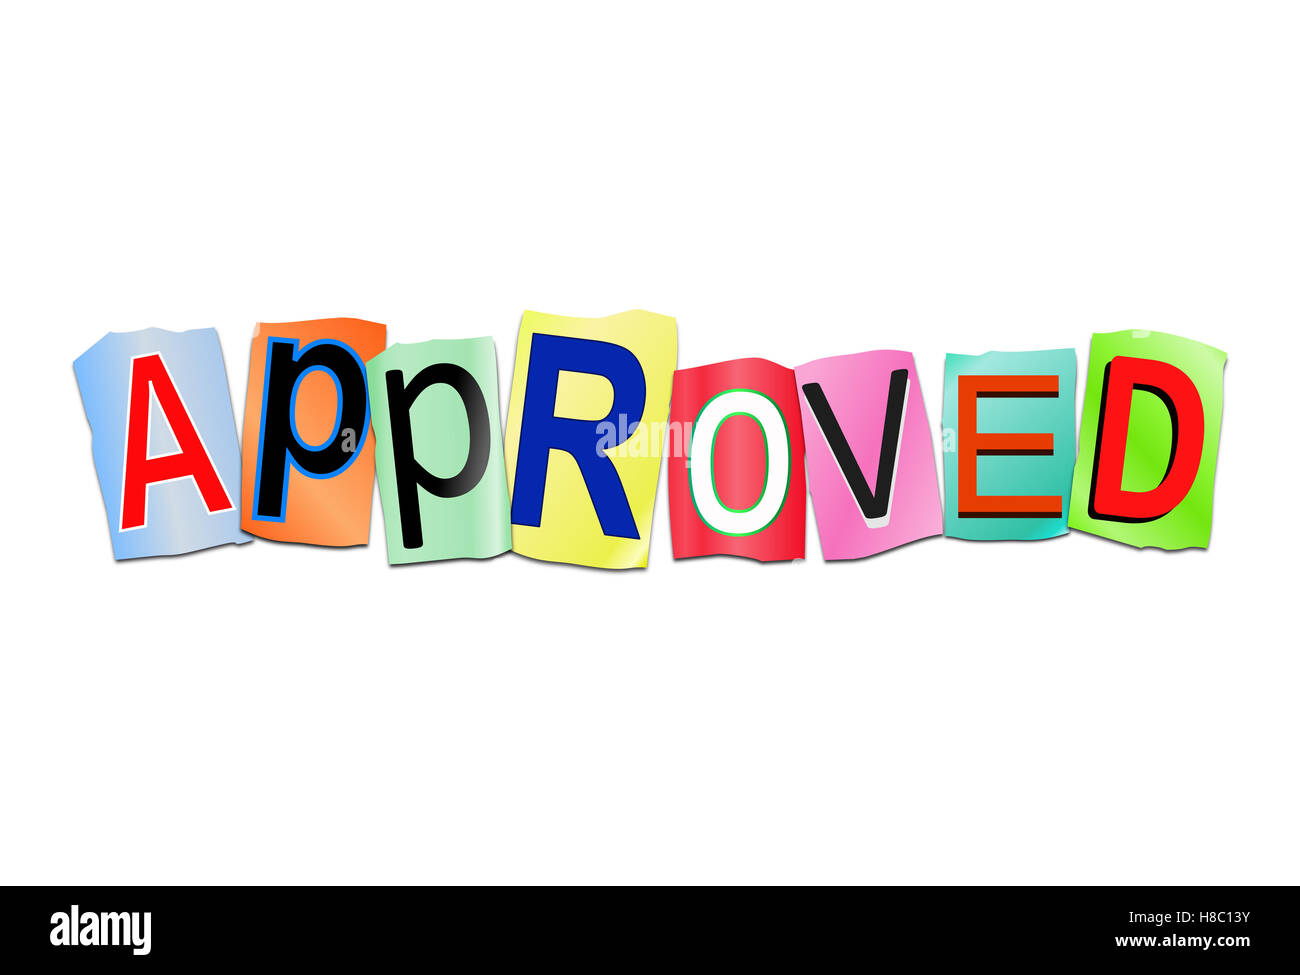 Approval. Stock Photo